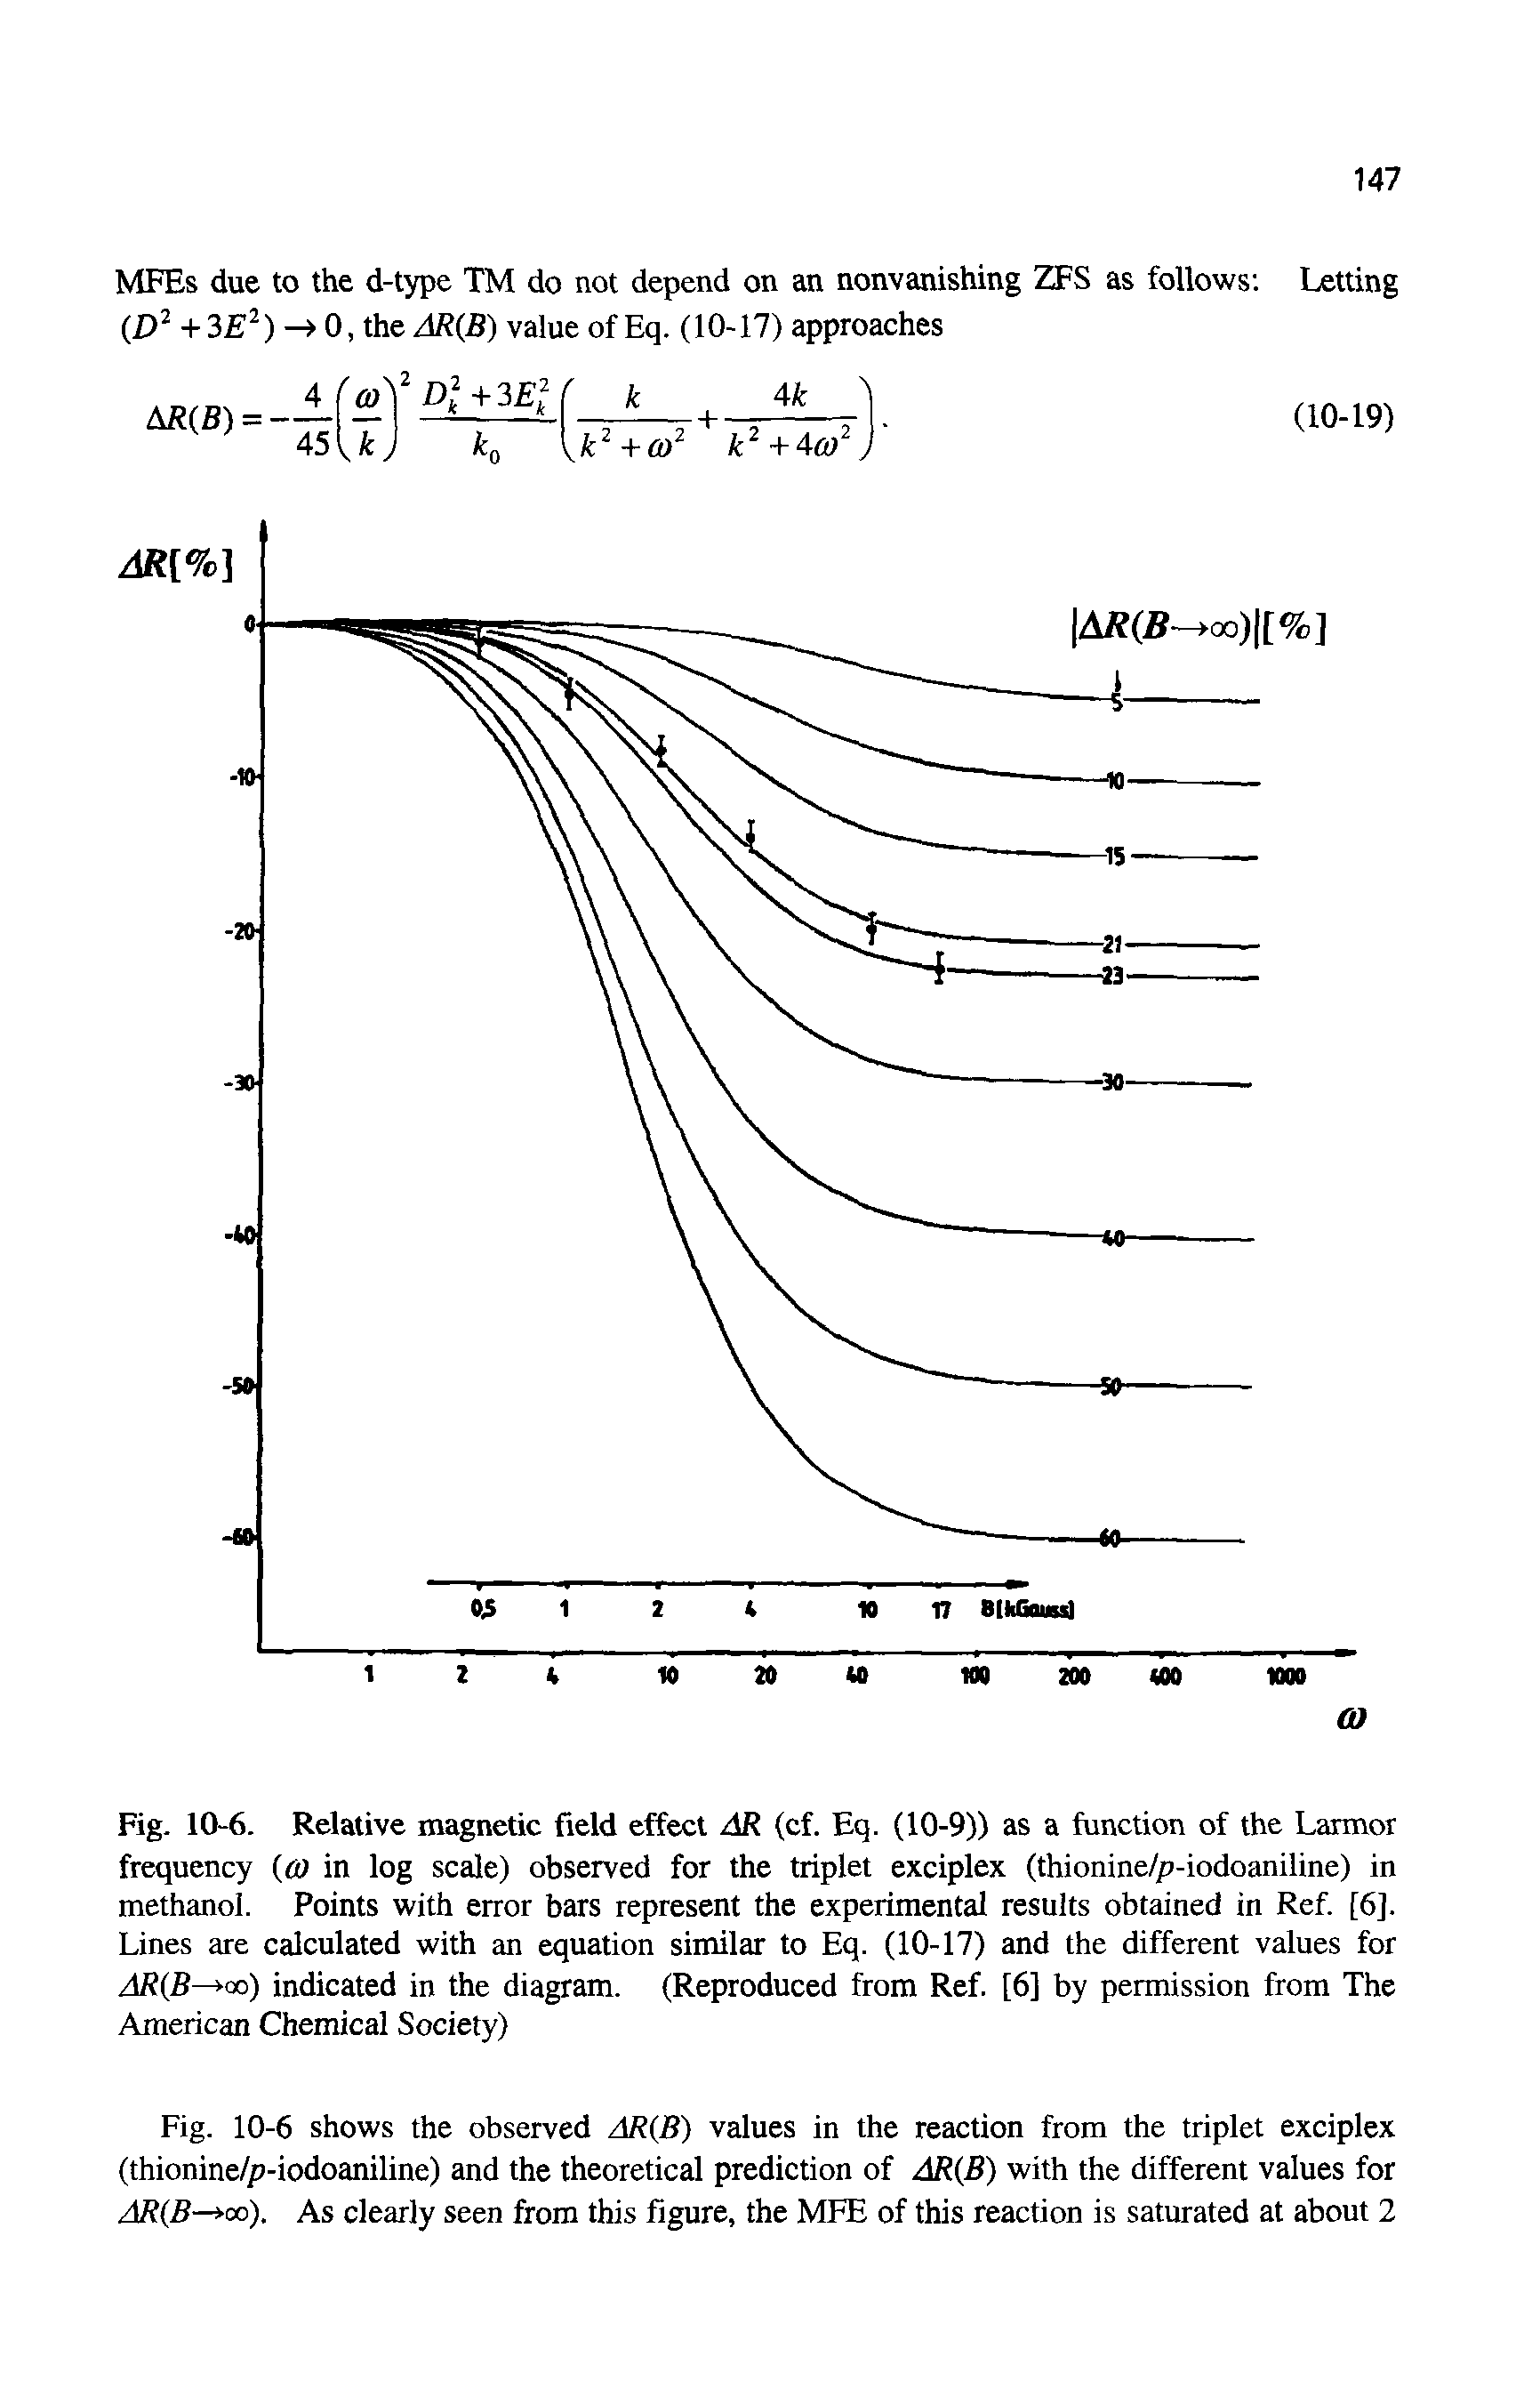 Fig. 10-6. Relative magnetic field effect AR (cf. Eq. (10-9)) as a function of the Larmor frequency (CO in log scale) observed for the triplet exciplex (thionine/p-iodoaniline) in methanol. Points with error bars represent the experimental results obtained in Ref. [6]. Lines are calculated with an equation similar to Eq. (10-17) and the different values for ARiB ao) indicated in the diagram. (Reproduced from Ref [6] by permission from The American Chemical Society)...